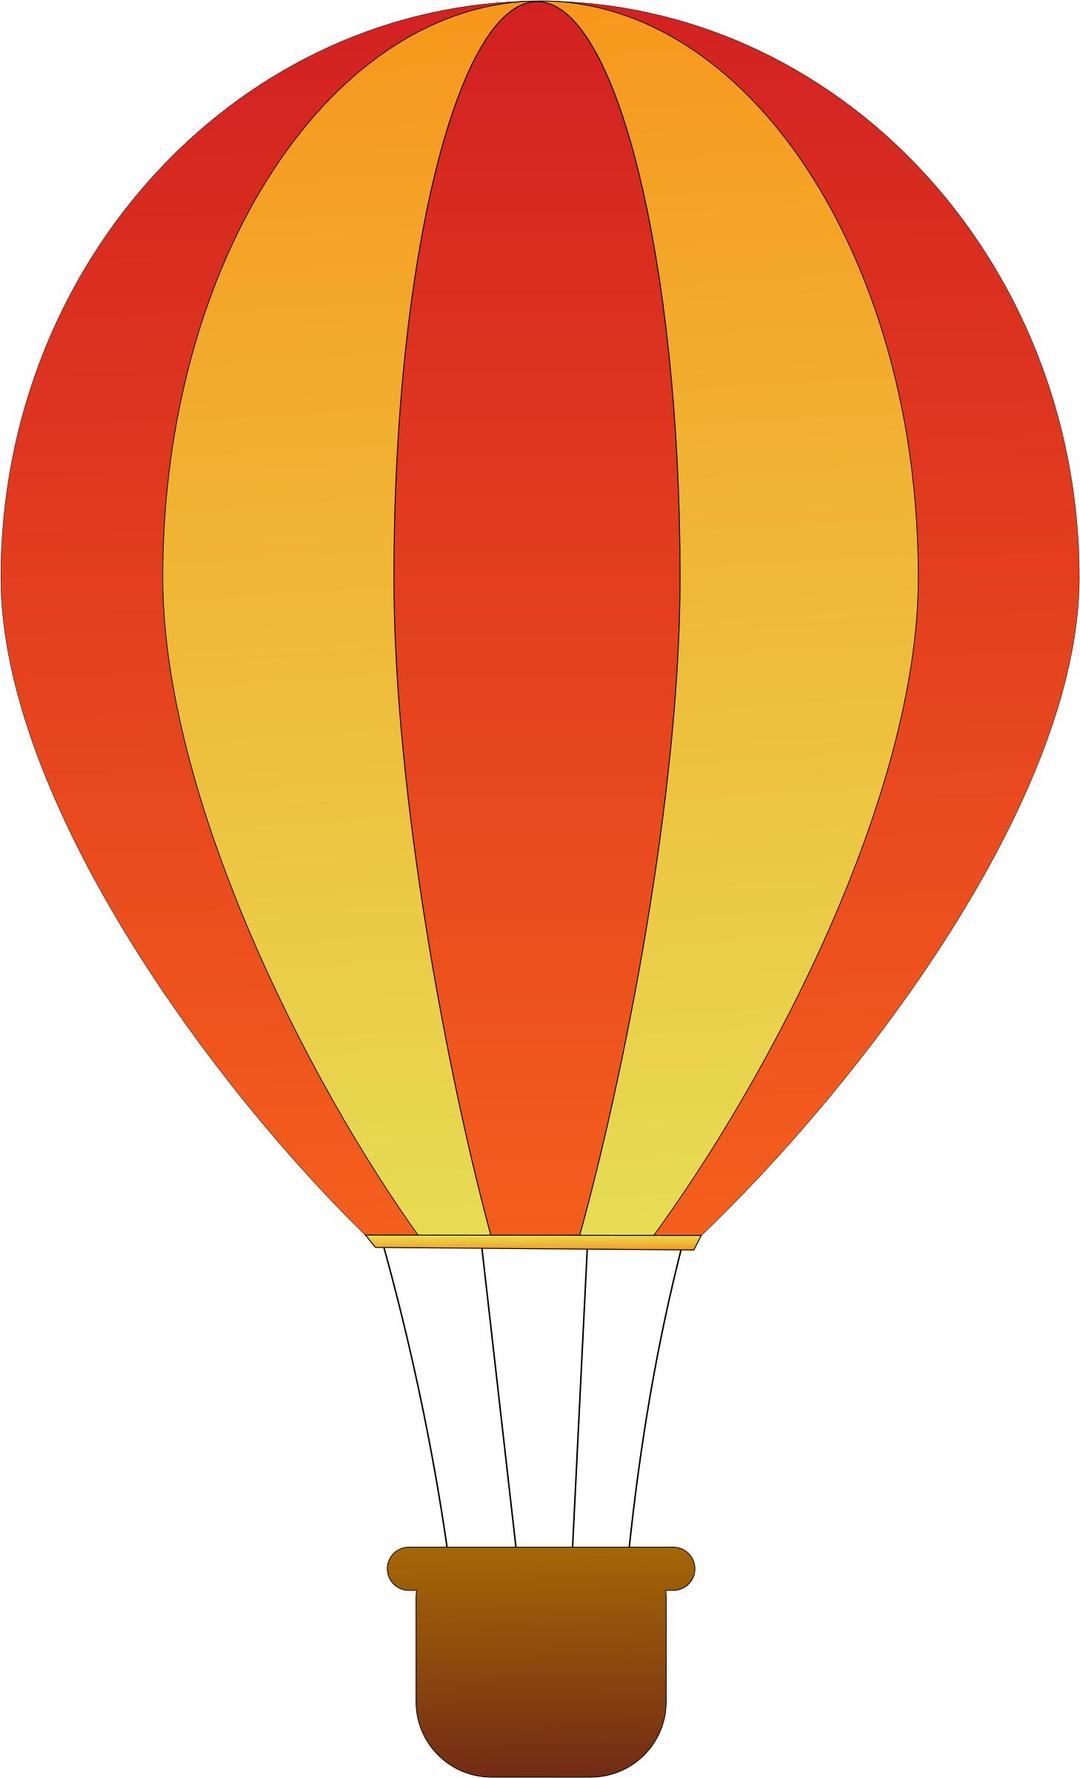 Vertical Striped Hot Air Balloons 2 png transparent